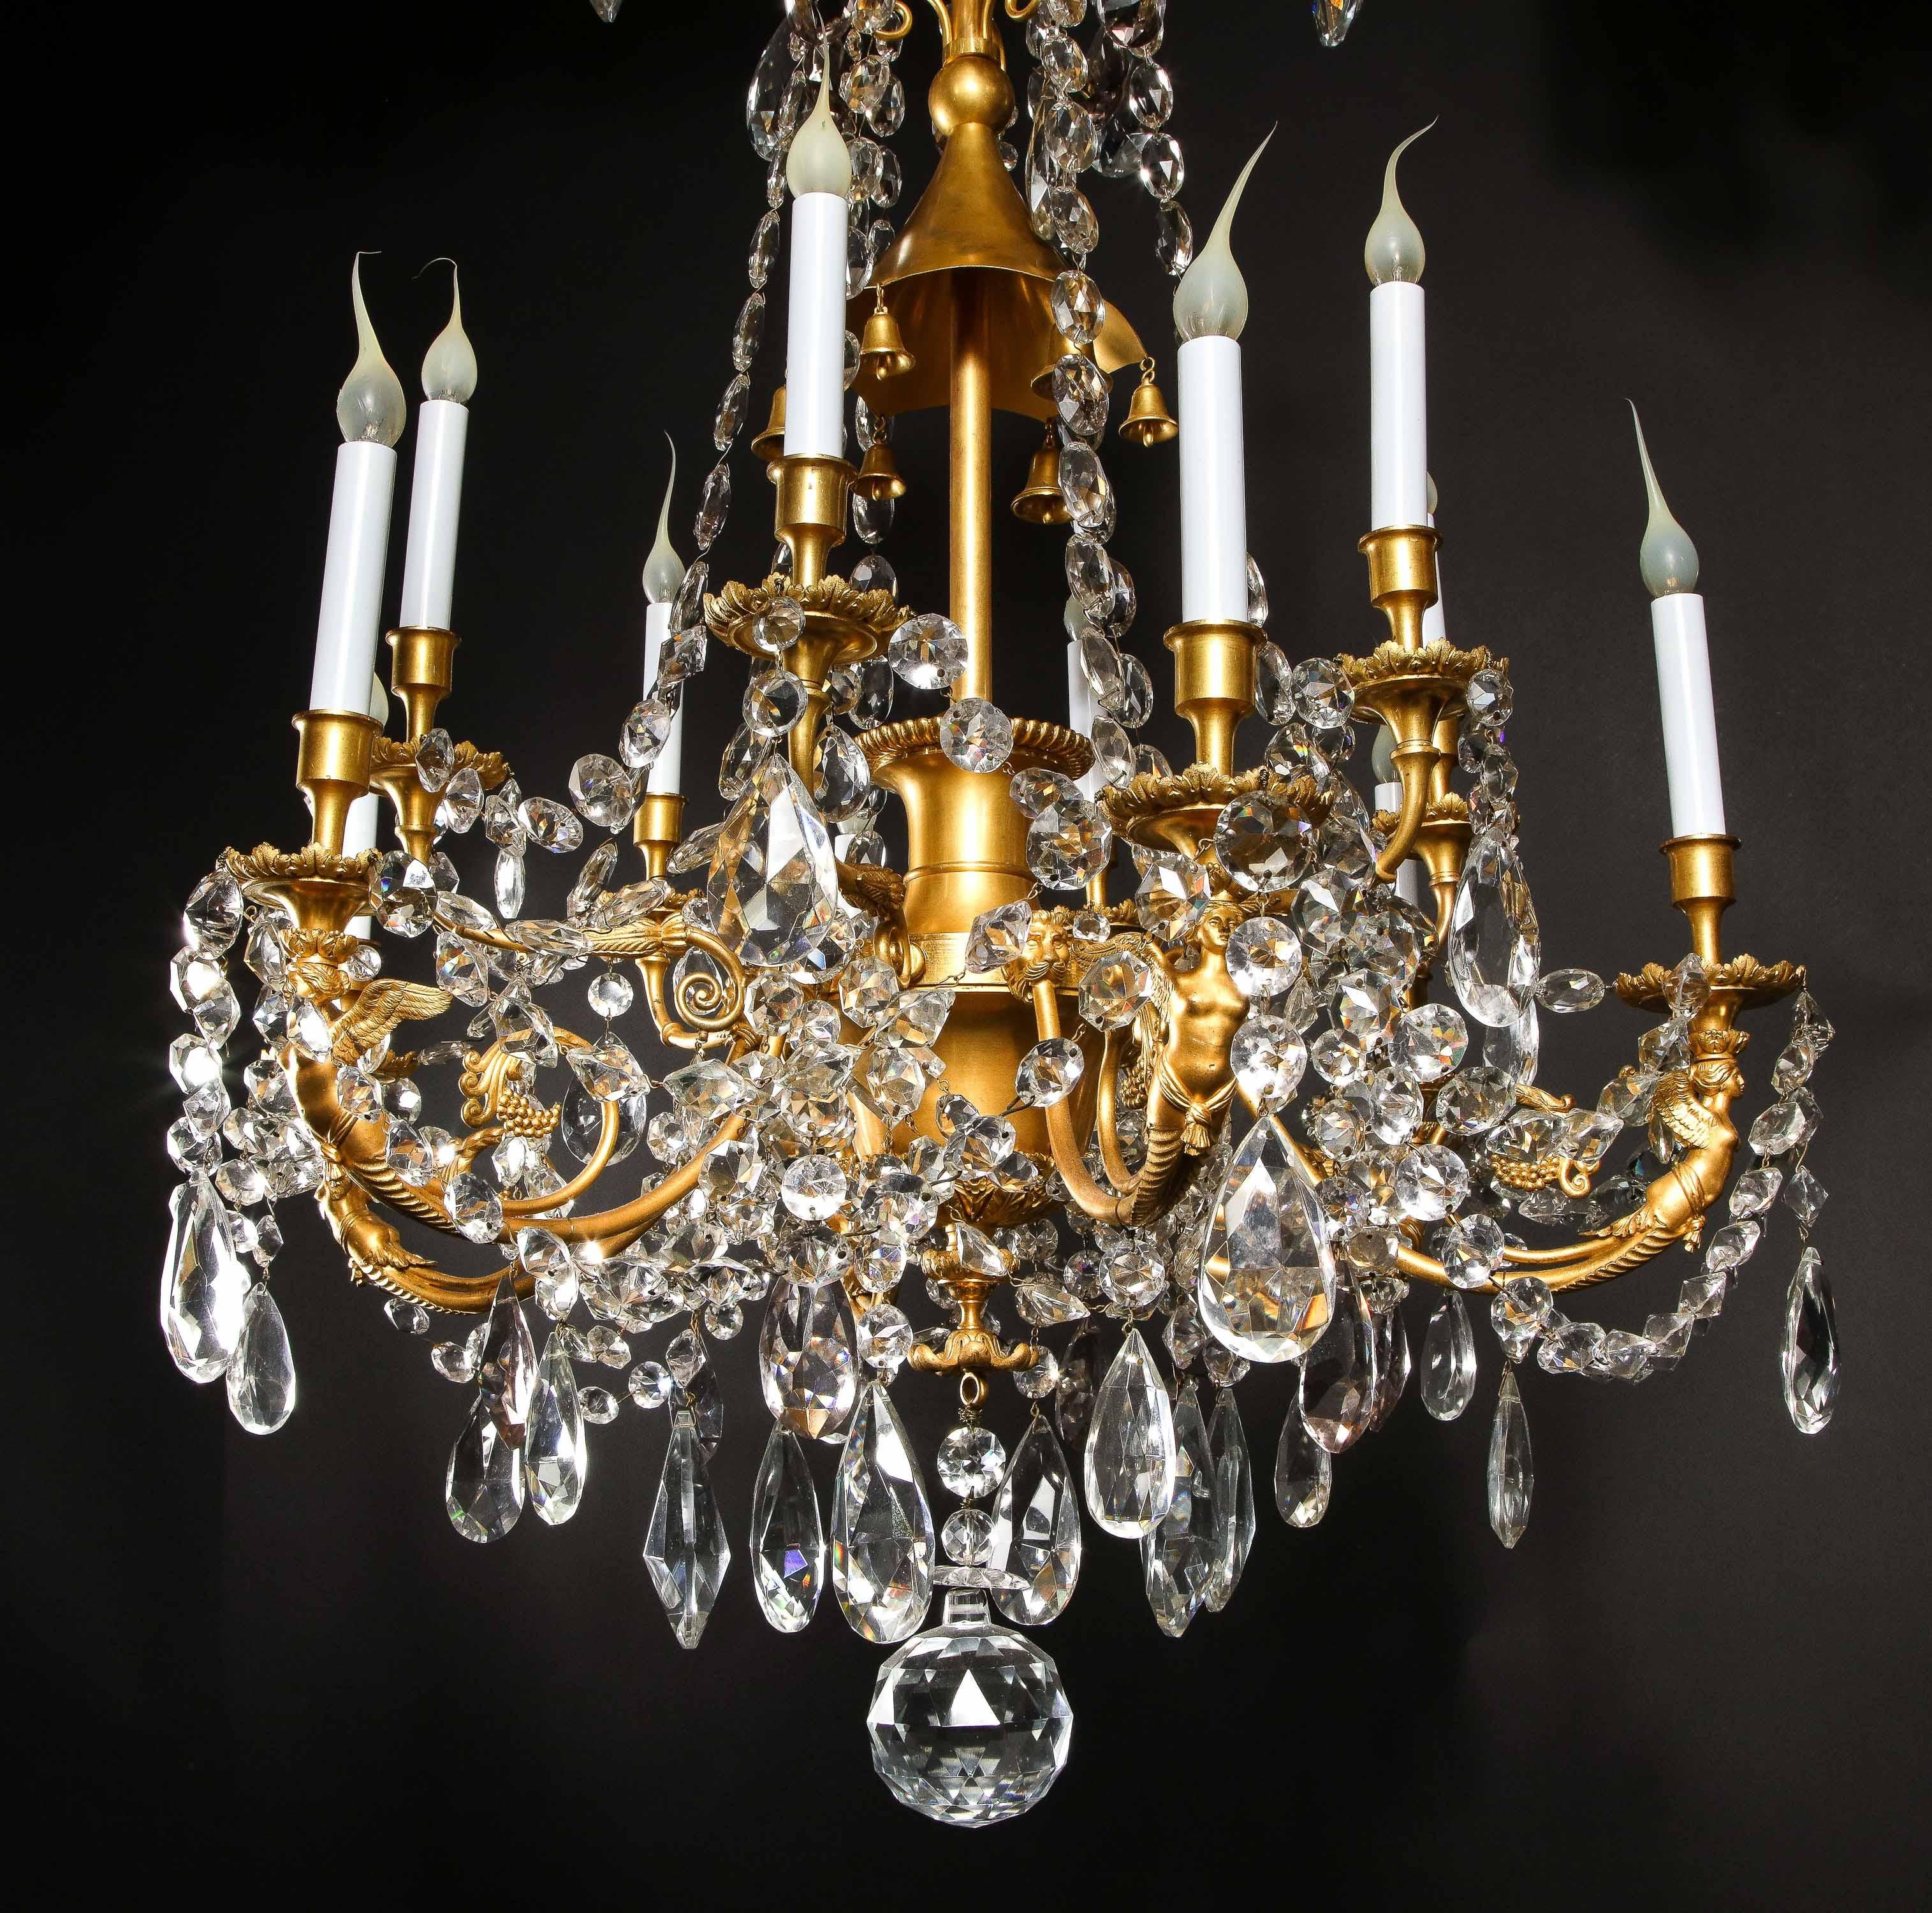 Spectacular Antique French Louis XVI Style Gilt Bronze and Crystal Chandelier For Sale 1